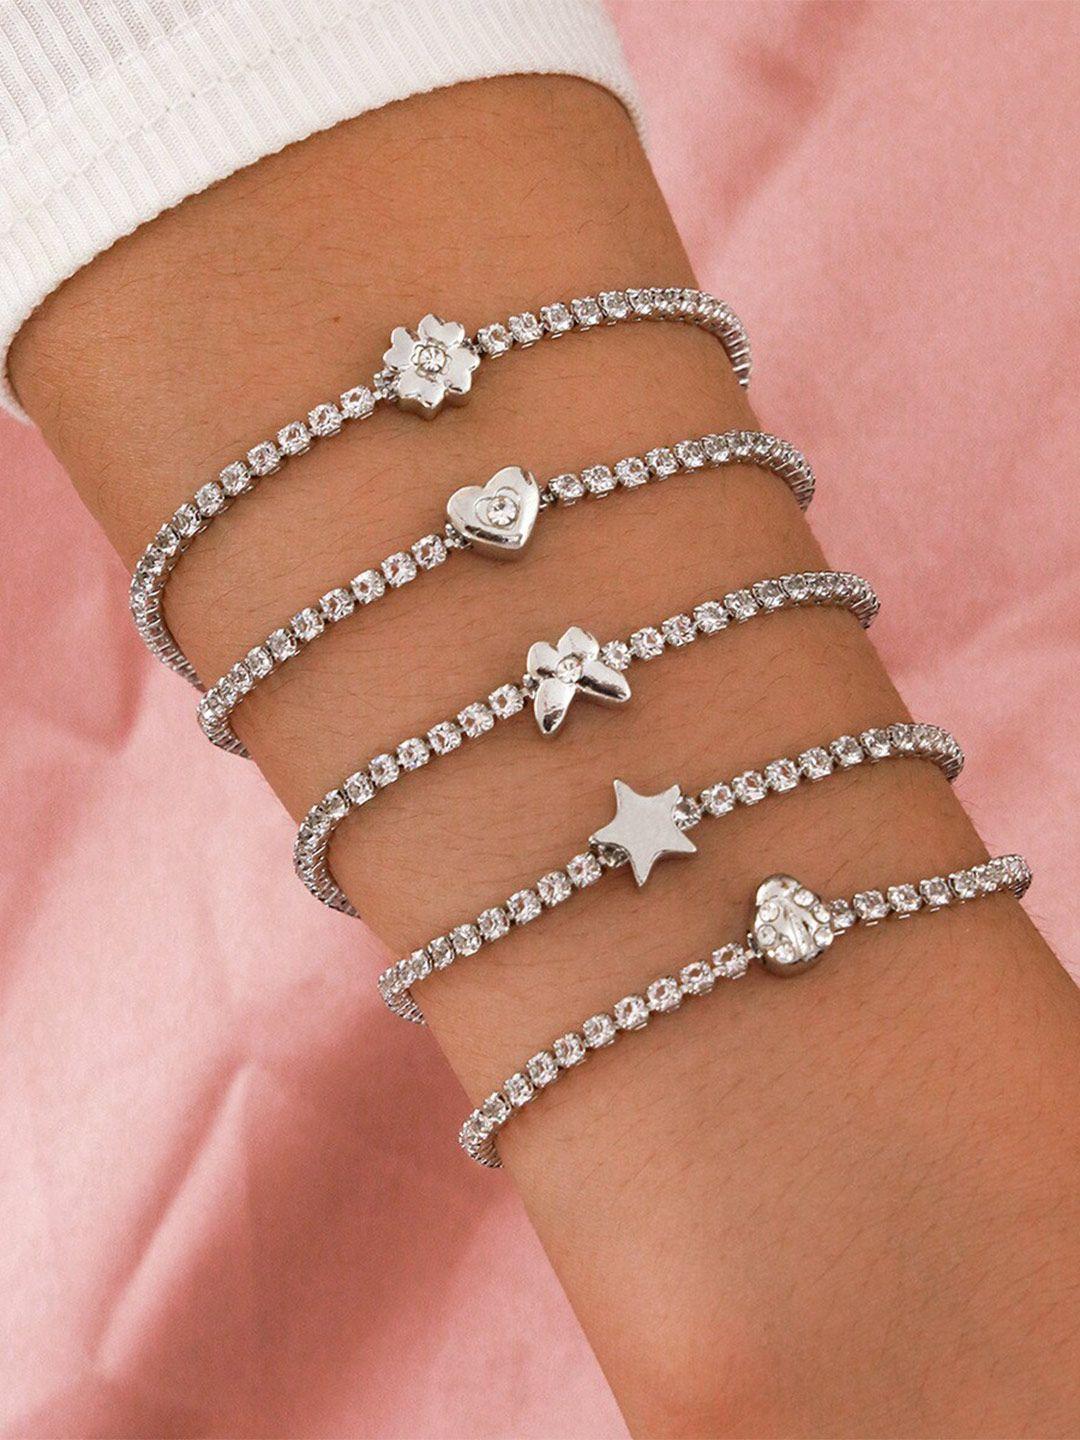 shining diva fashion women 5 silver-toned crystals silver-plated link bracelet